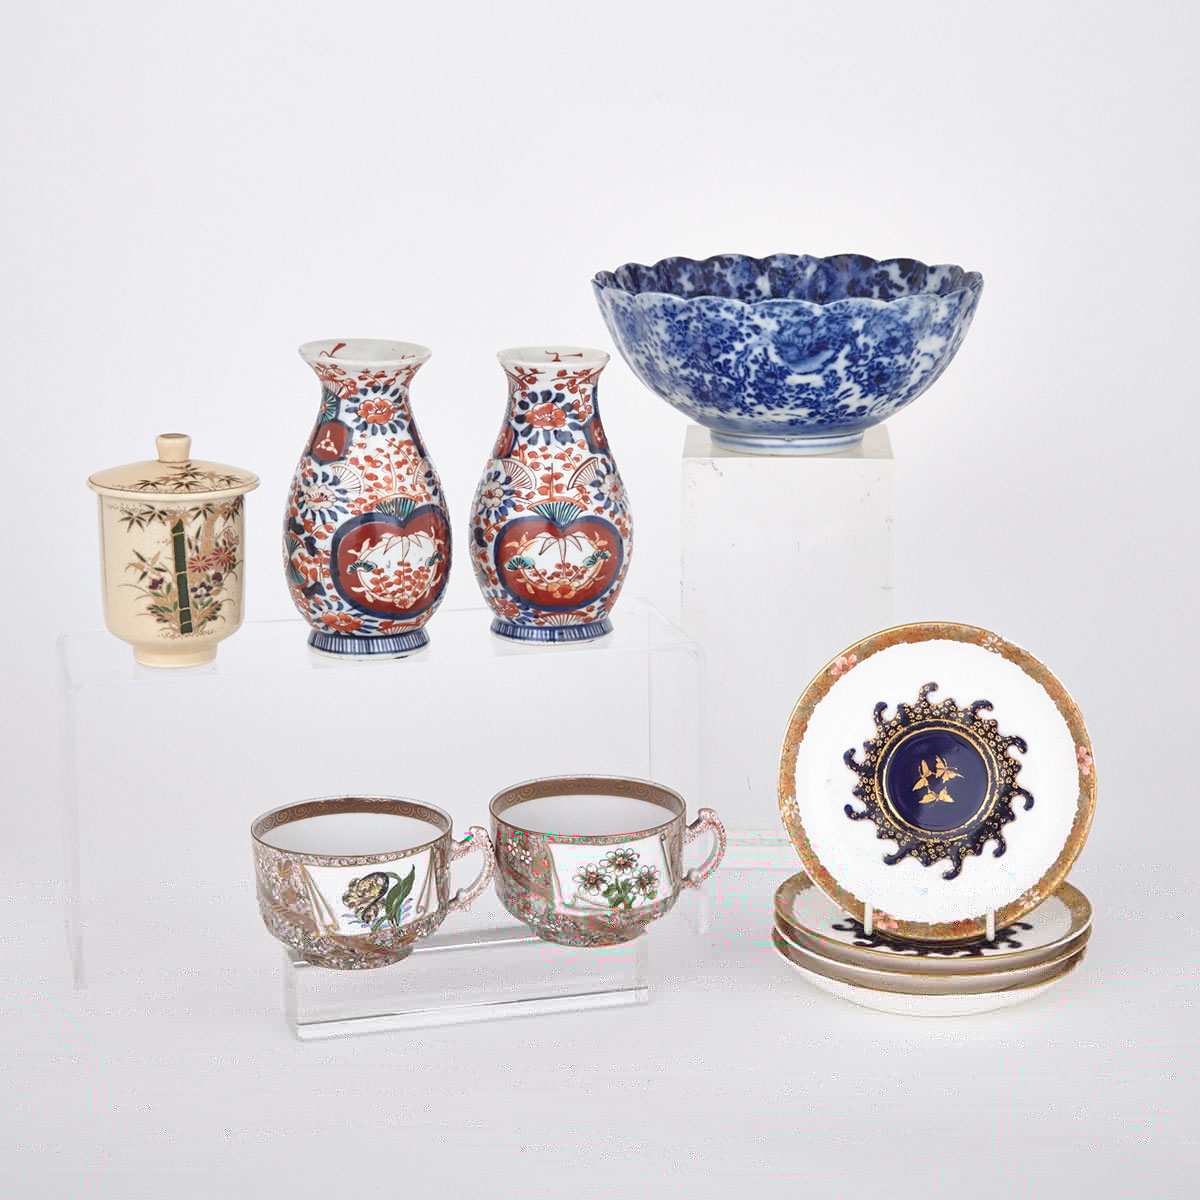 Group of Assorted Japanese Porcelain, 19th/20th Century